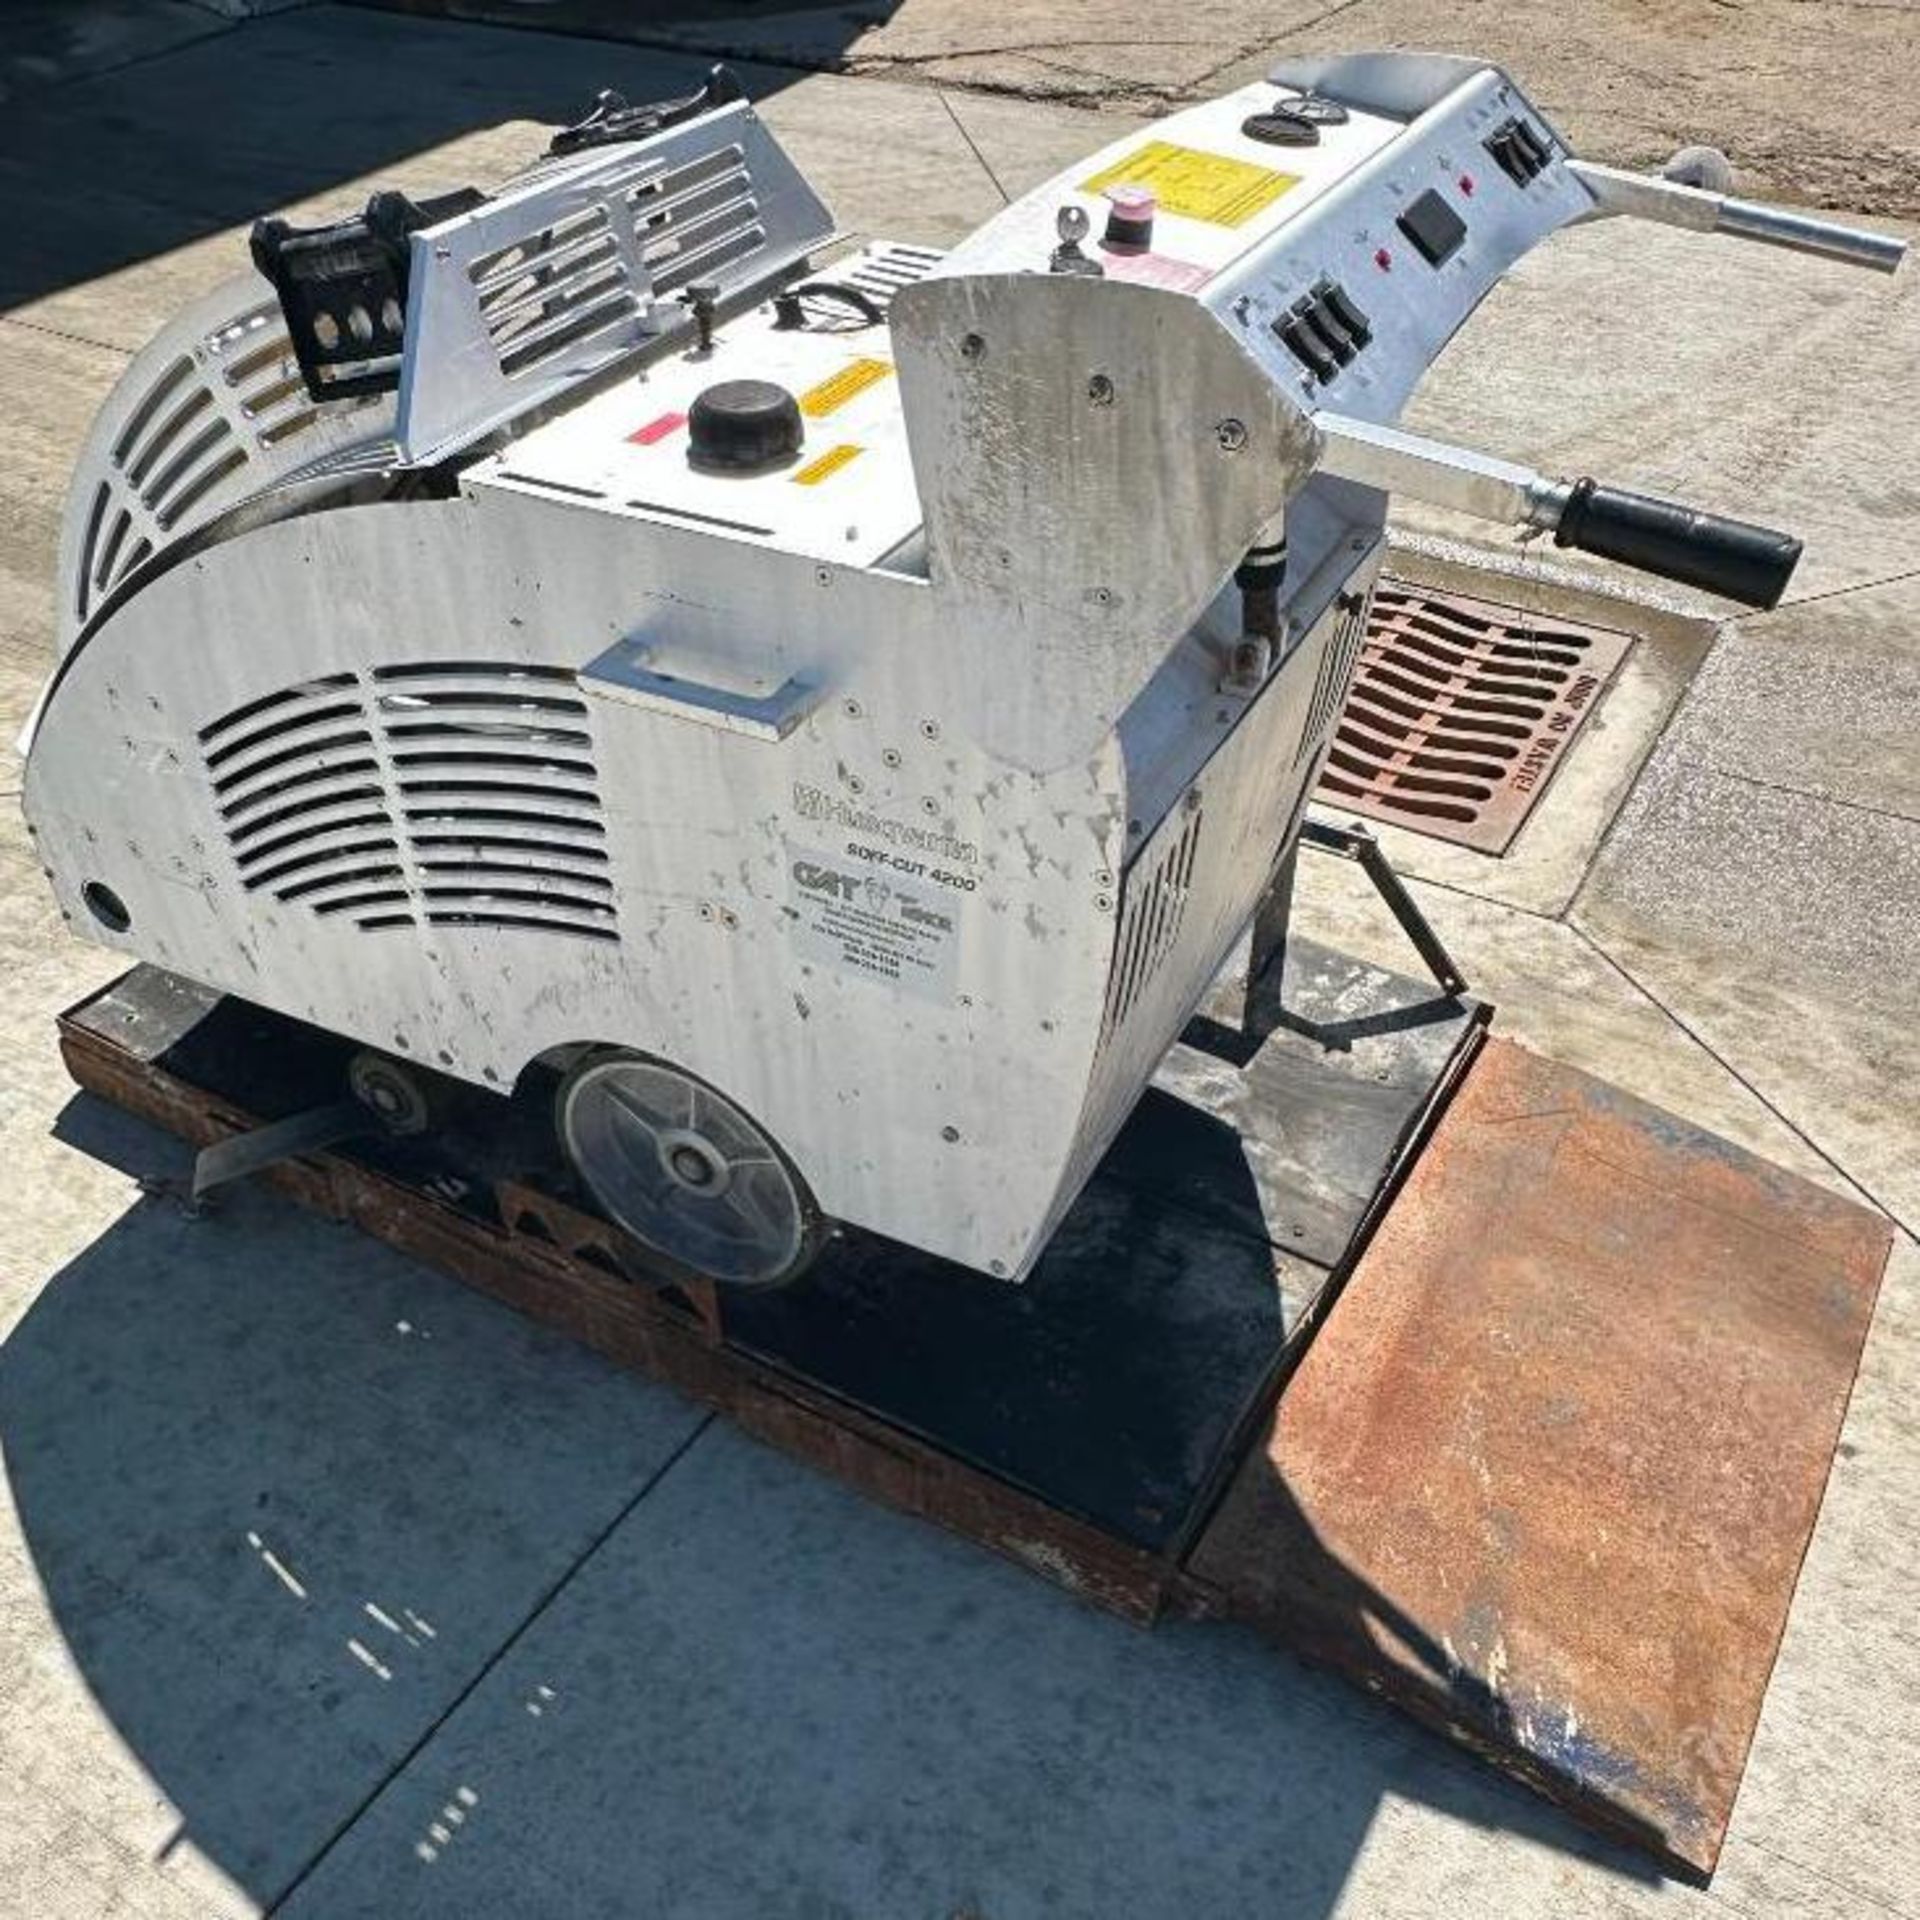 Soff Cut 4200 14" early entry concrete saw, Kohler engine, 296 hours, power handle adjustment, power - Image 4 of 10